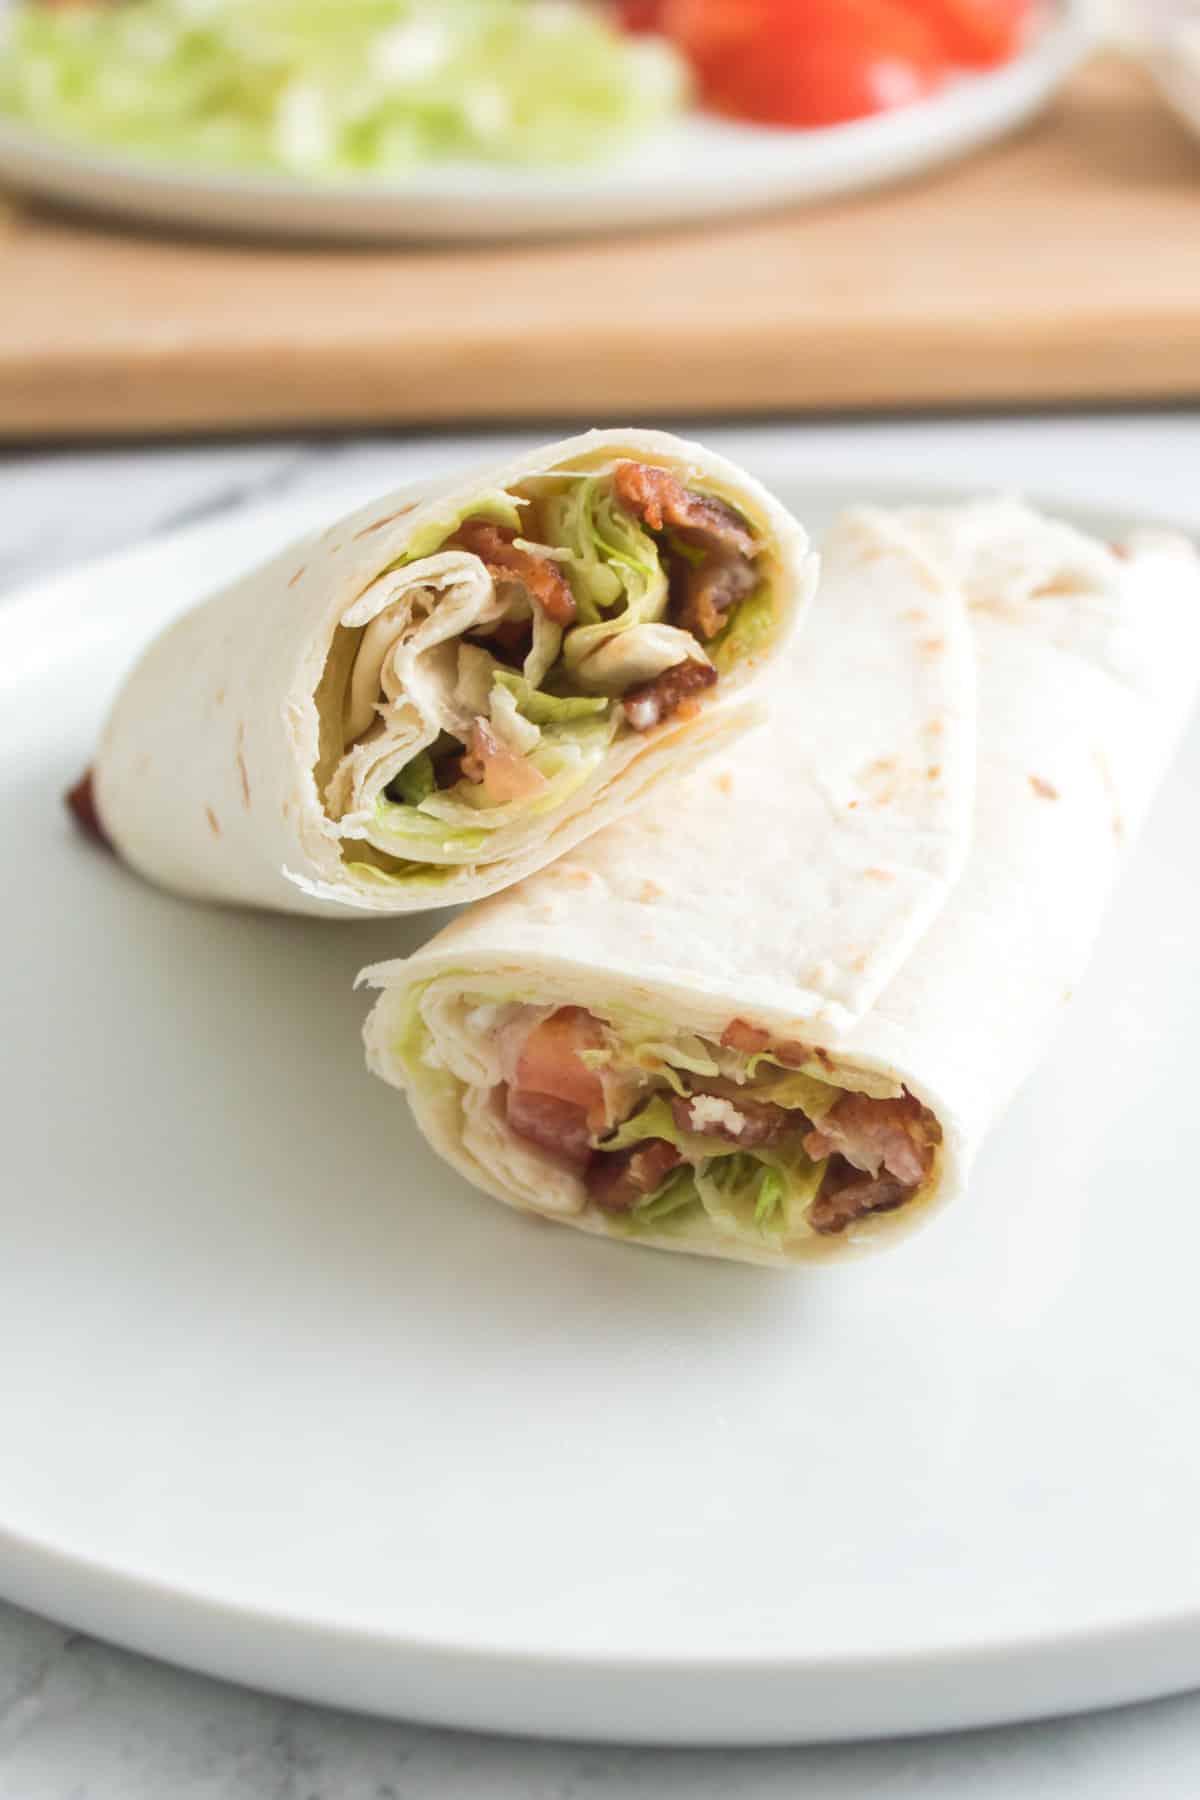 rolled up wrap on a plate and sliced in half.